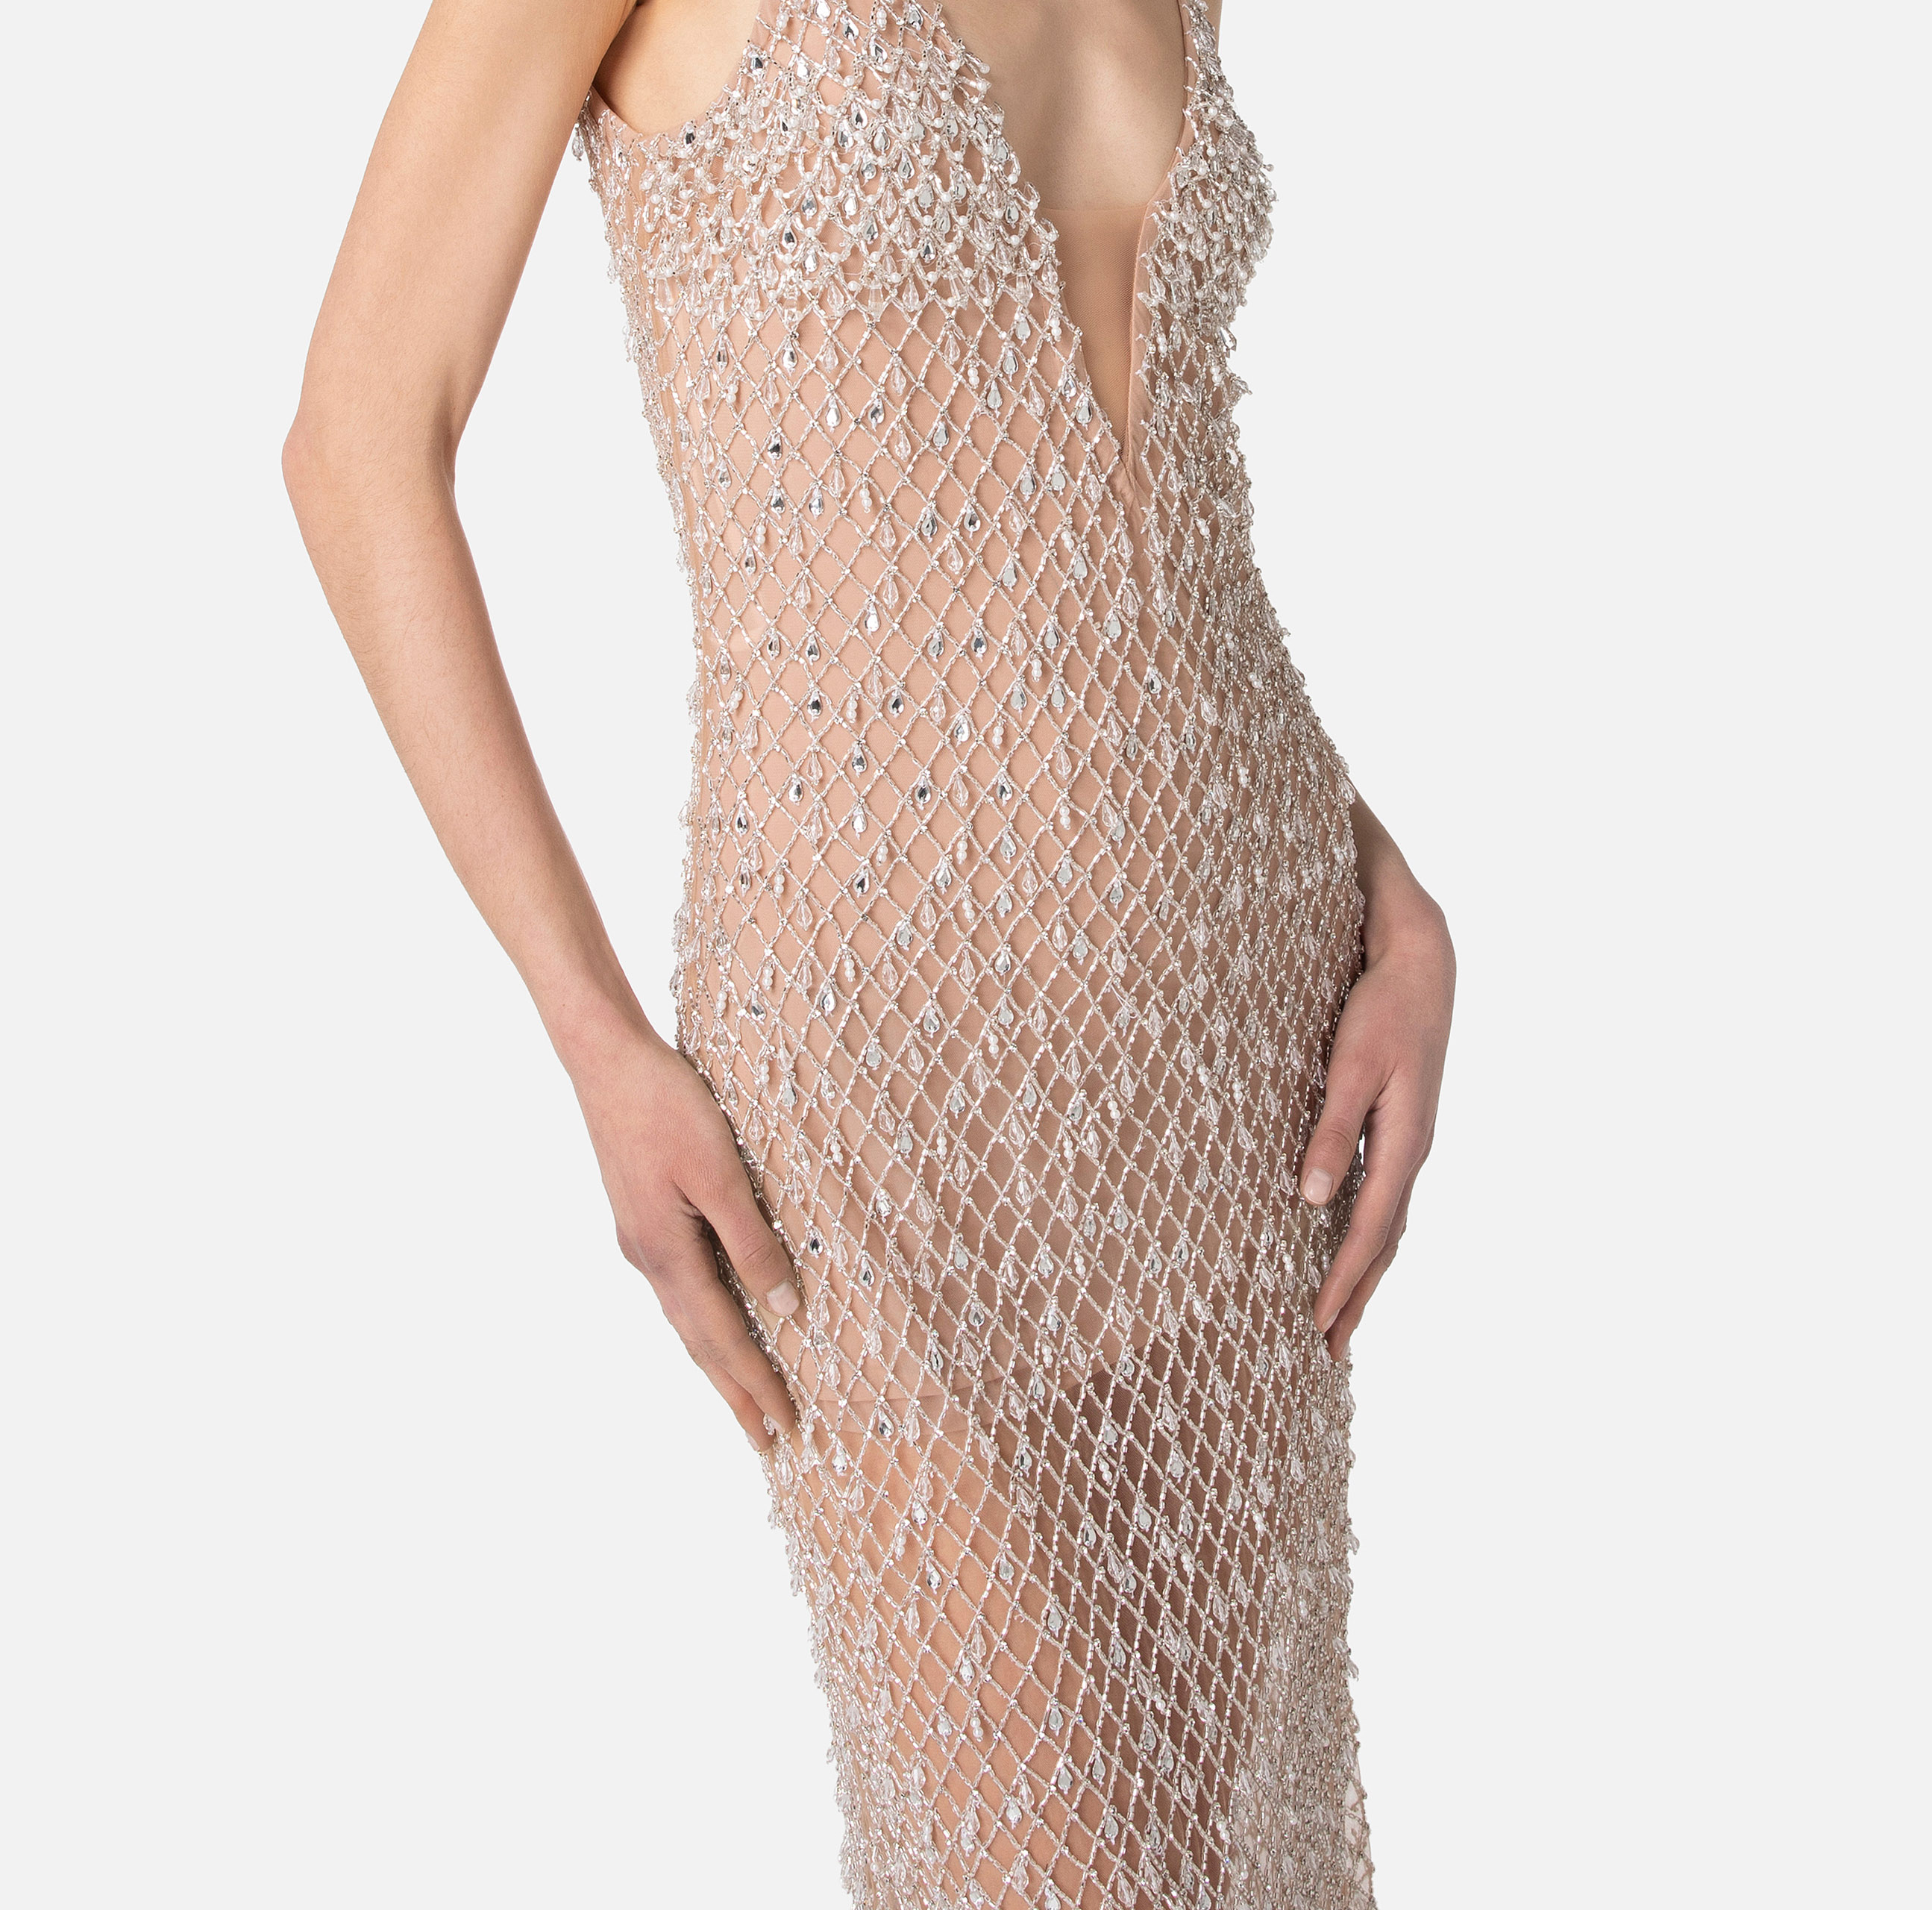 Tulle Red Carpet dress with diamond embroidery - Elisabetta Franchi